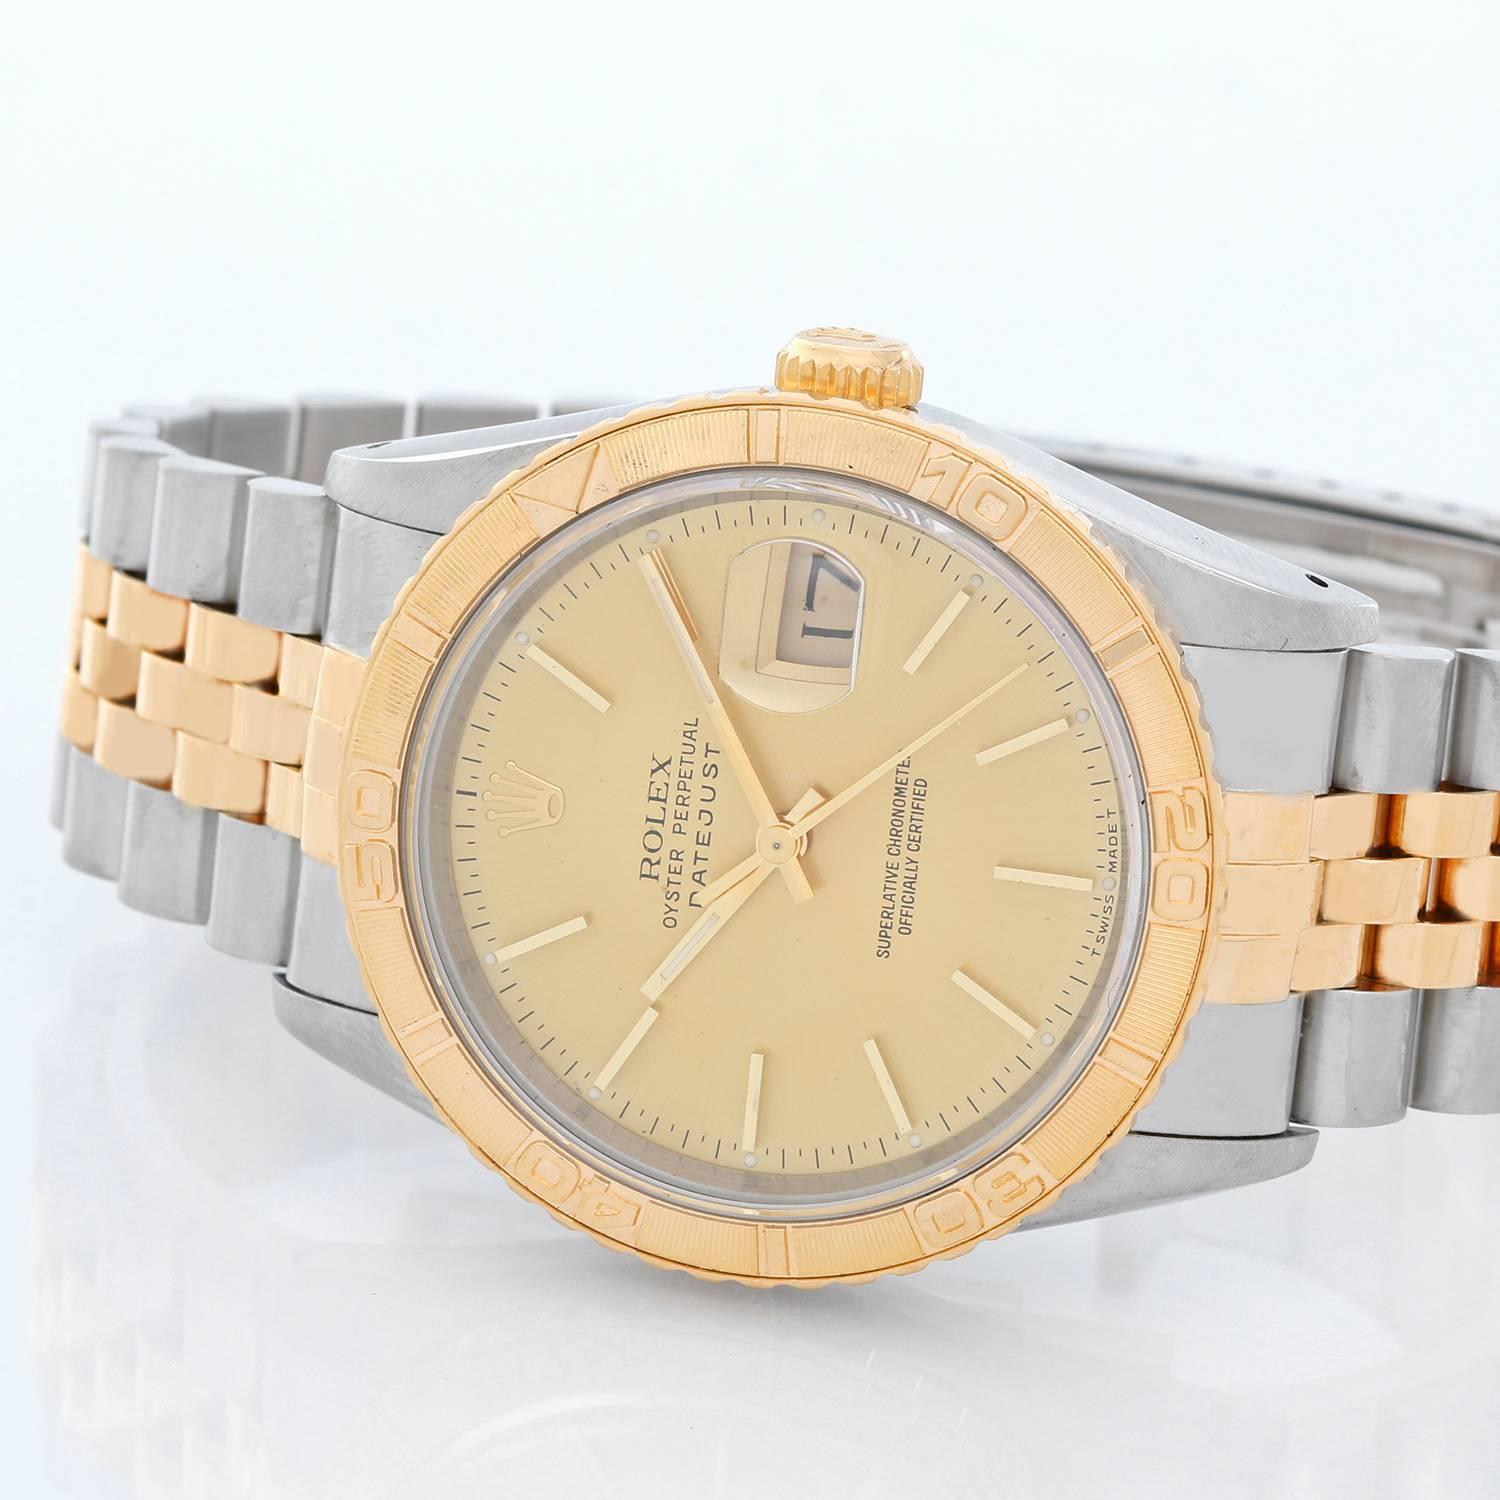 Rolex Turnograph Men's 2-Tone Watch 16263 - Automatic winding, 31 jewels, Quickset, sapphire crystal. Stainless steel case with 18k yellow gold bezel (36mm diameter). Champagne dial with stick markers. Stainless steel and 18k yellow gold Jubilee